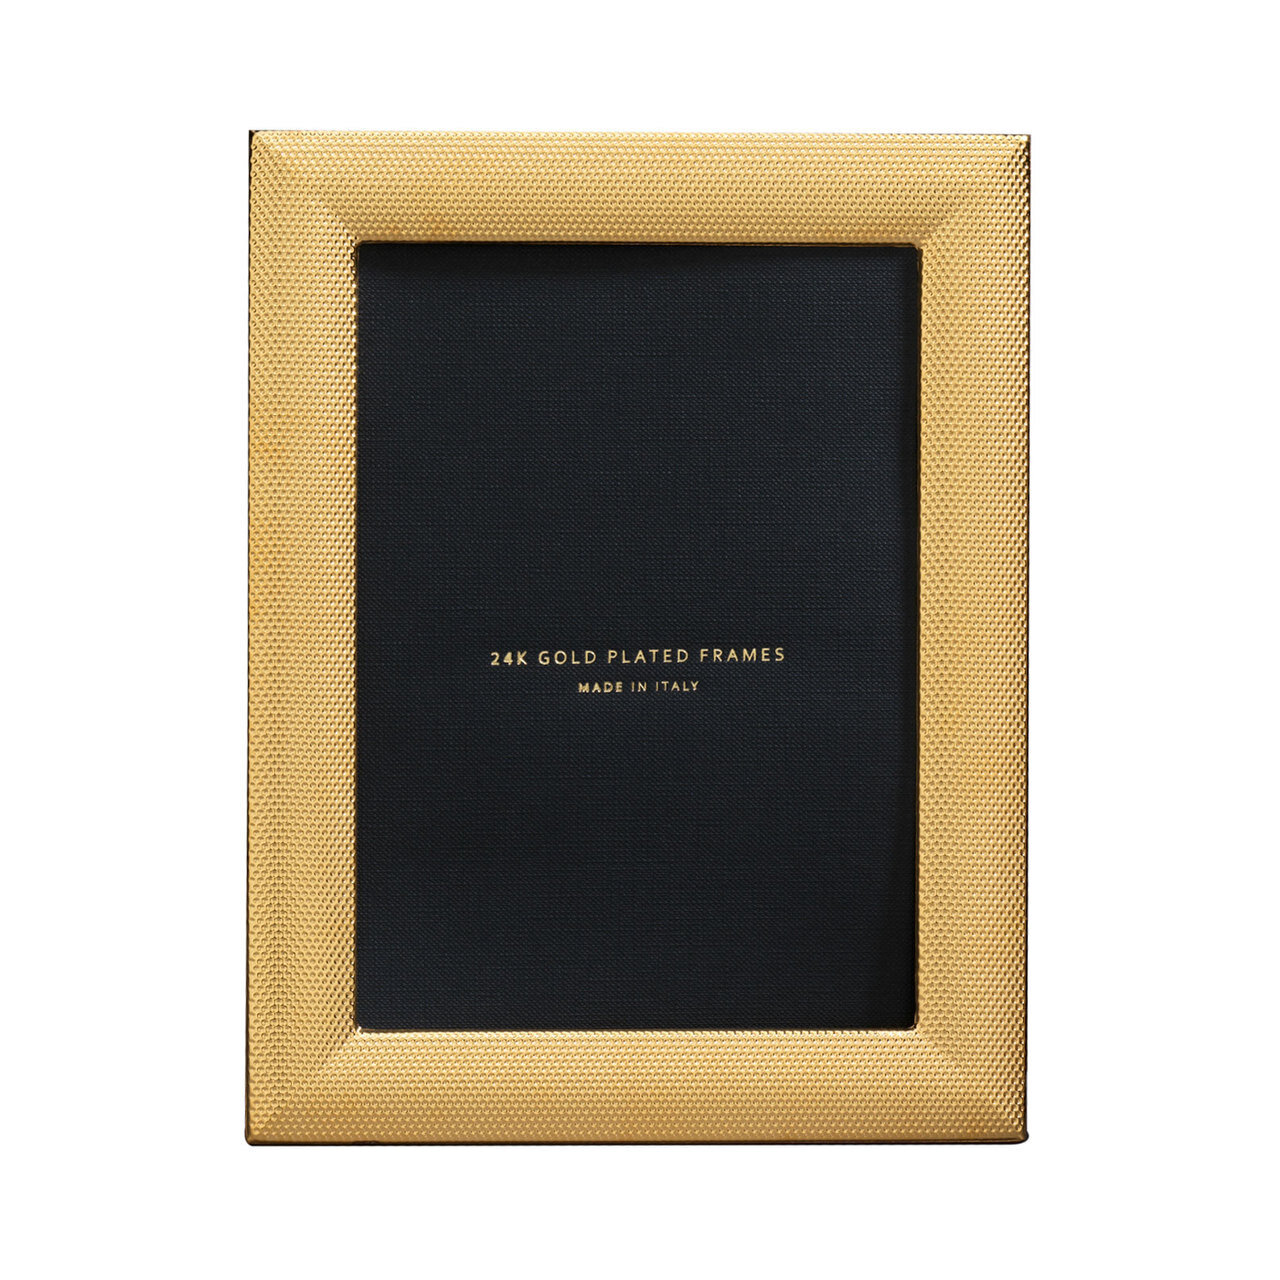 Cunill Cleo 4 x 6 Inch Picture Frame - 24k Gold Plated 0.5 Microns